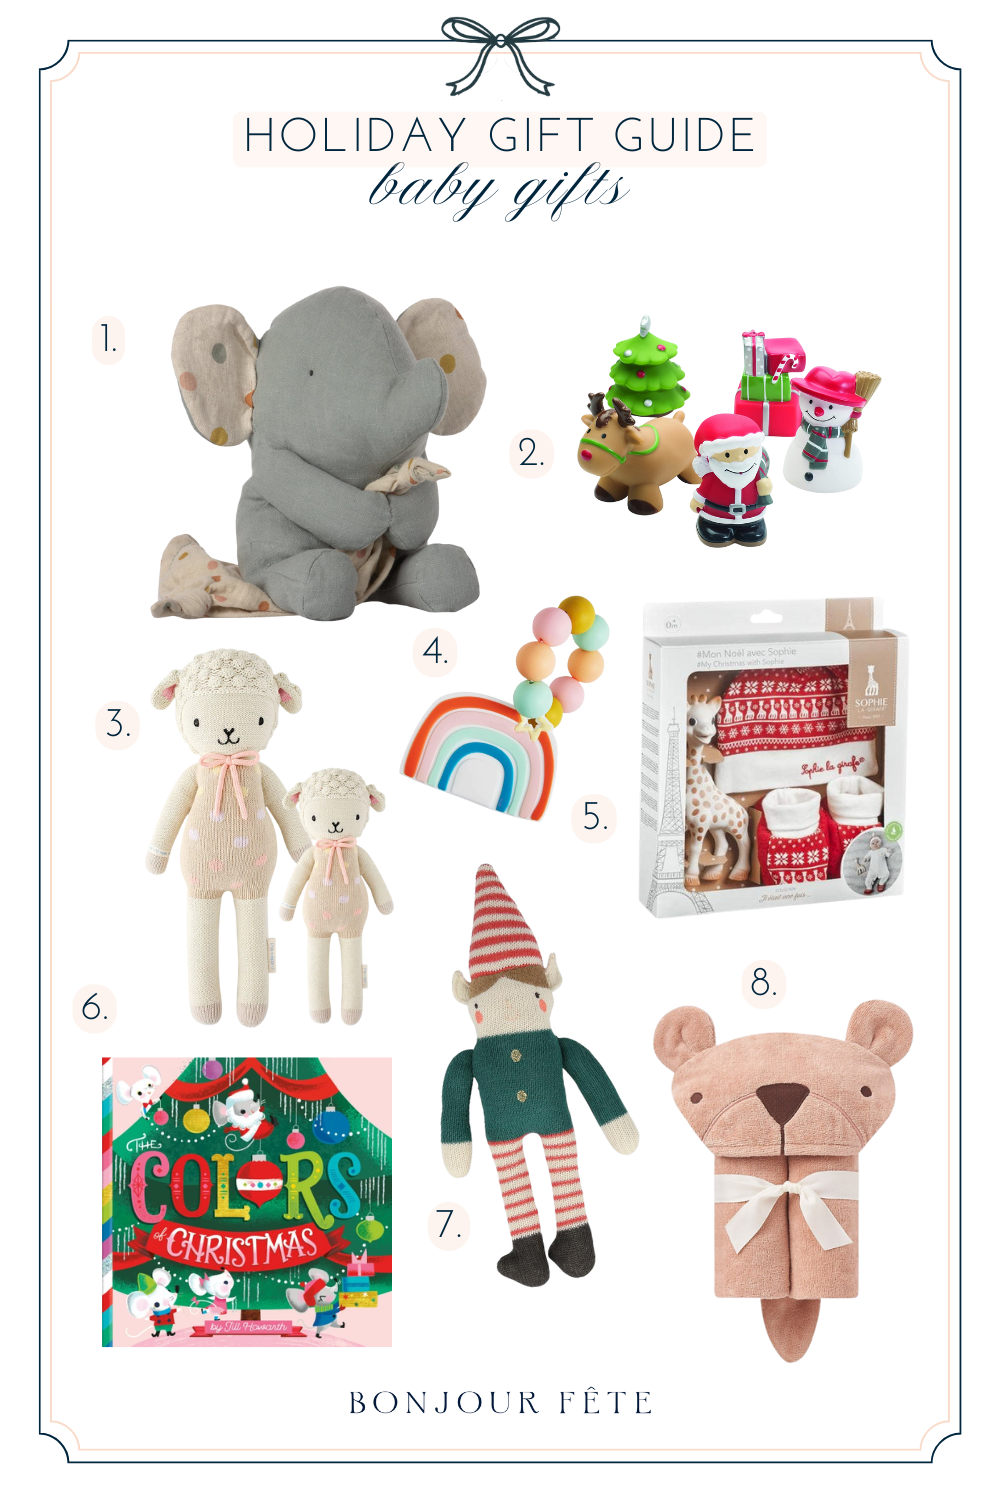 Baby gift ideas for Christmas.